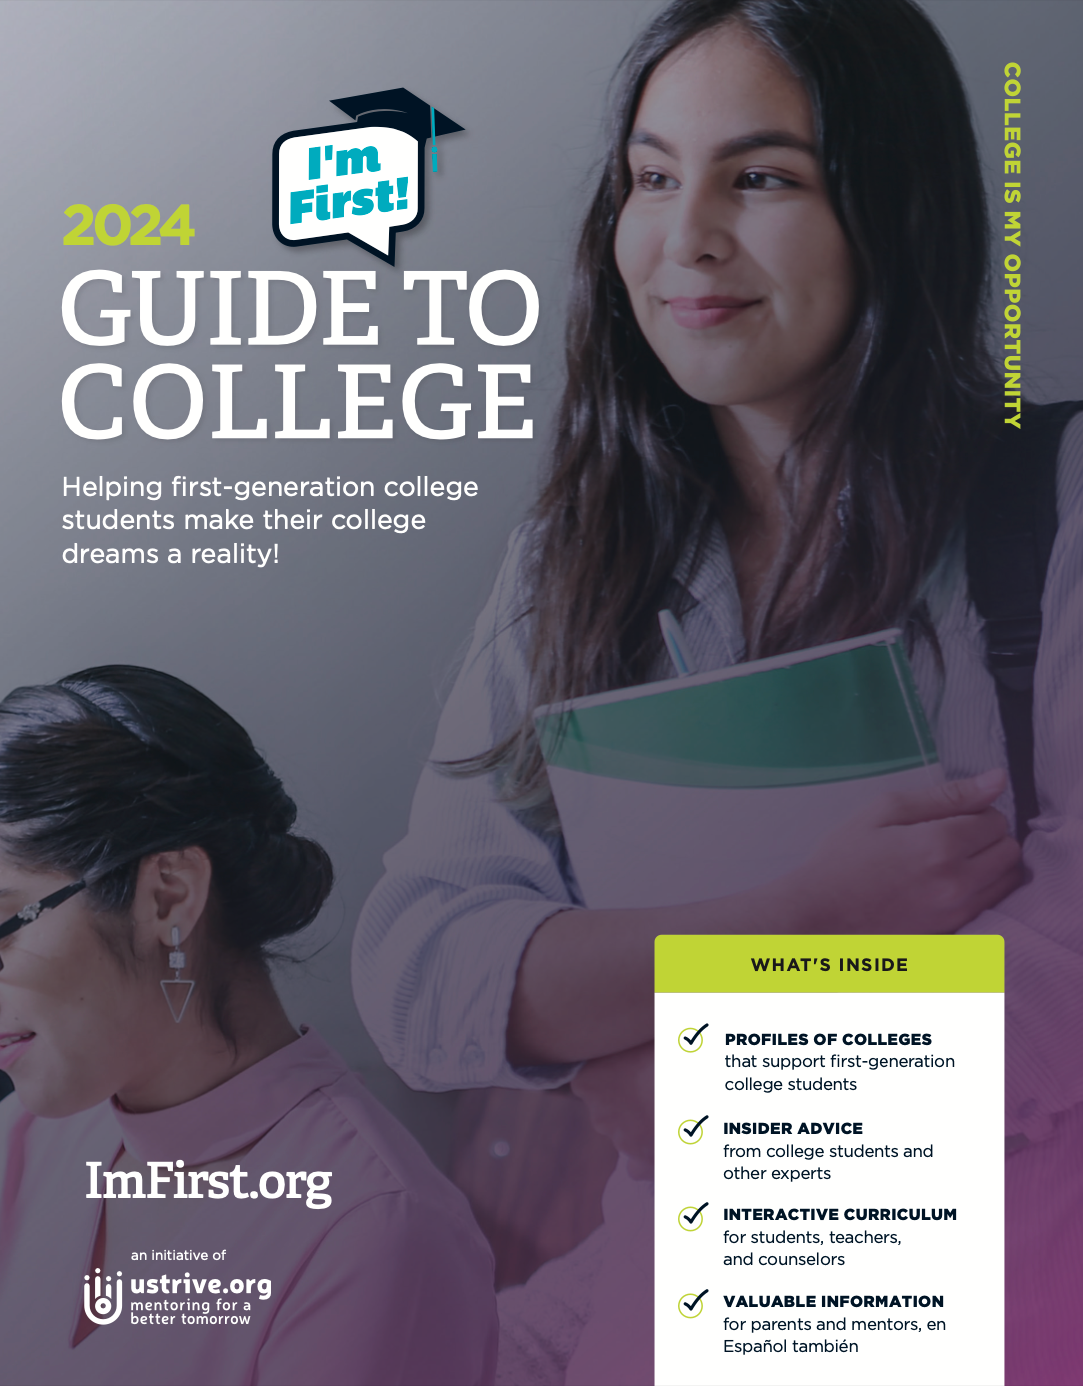 2024 I'm First! Guide to College